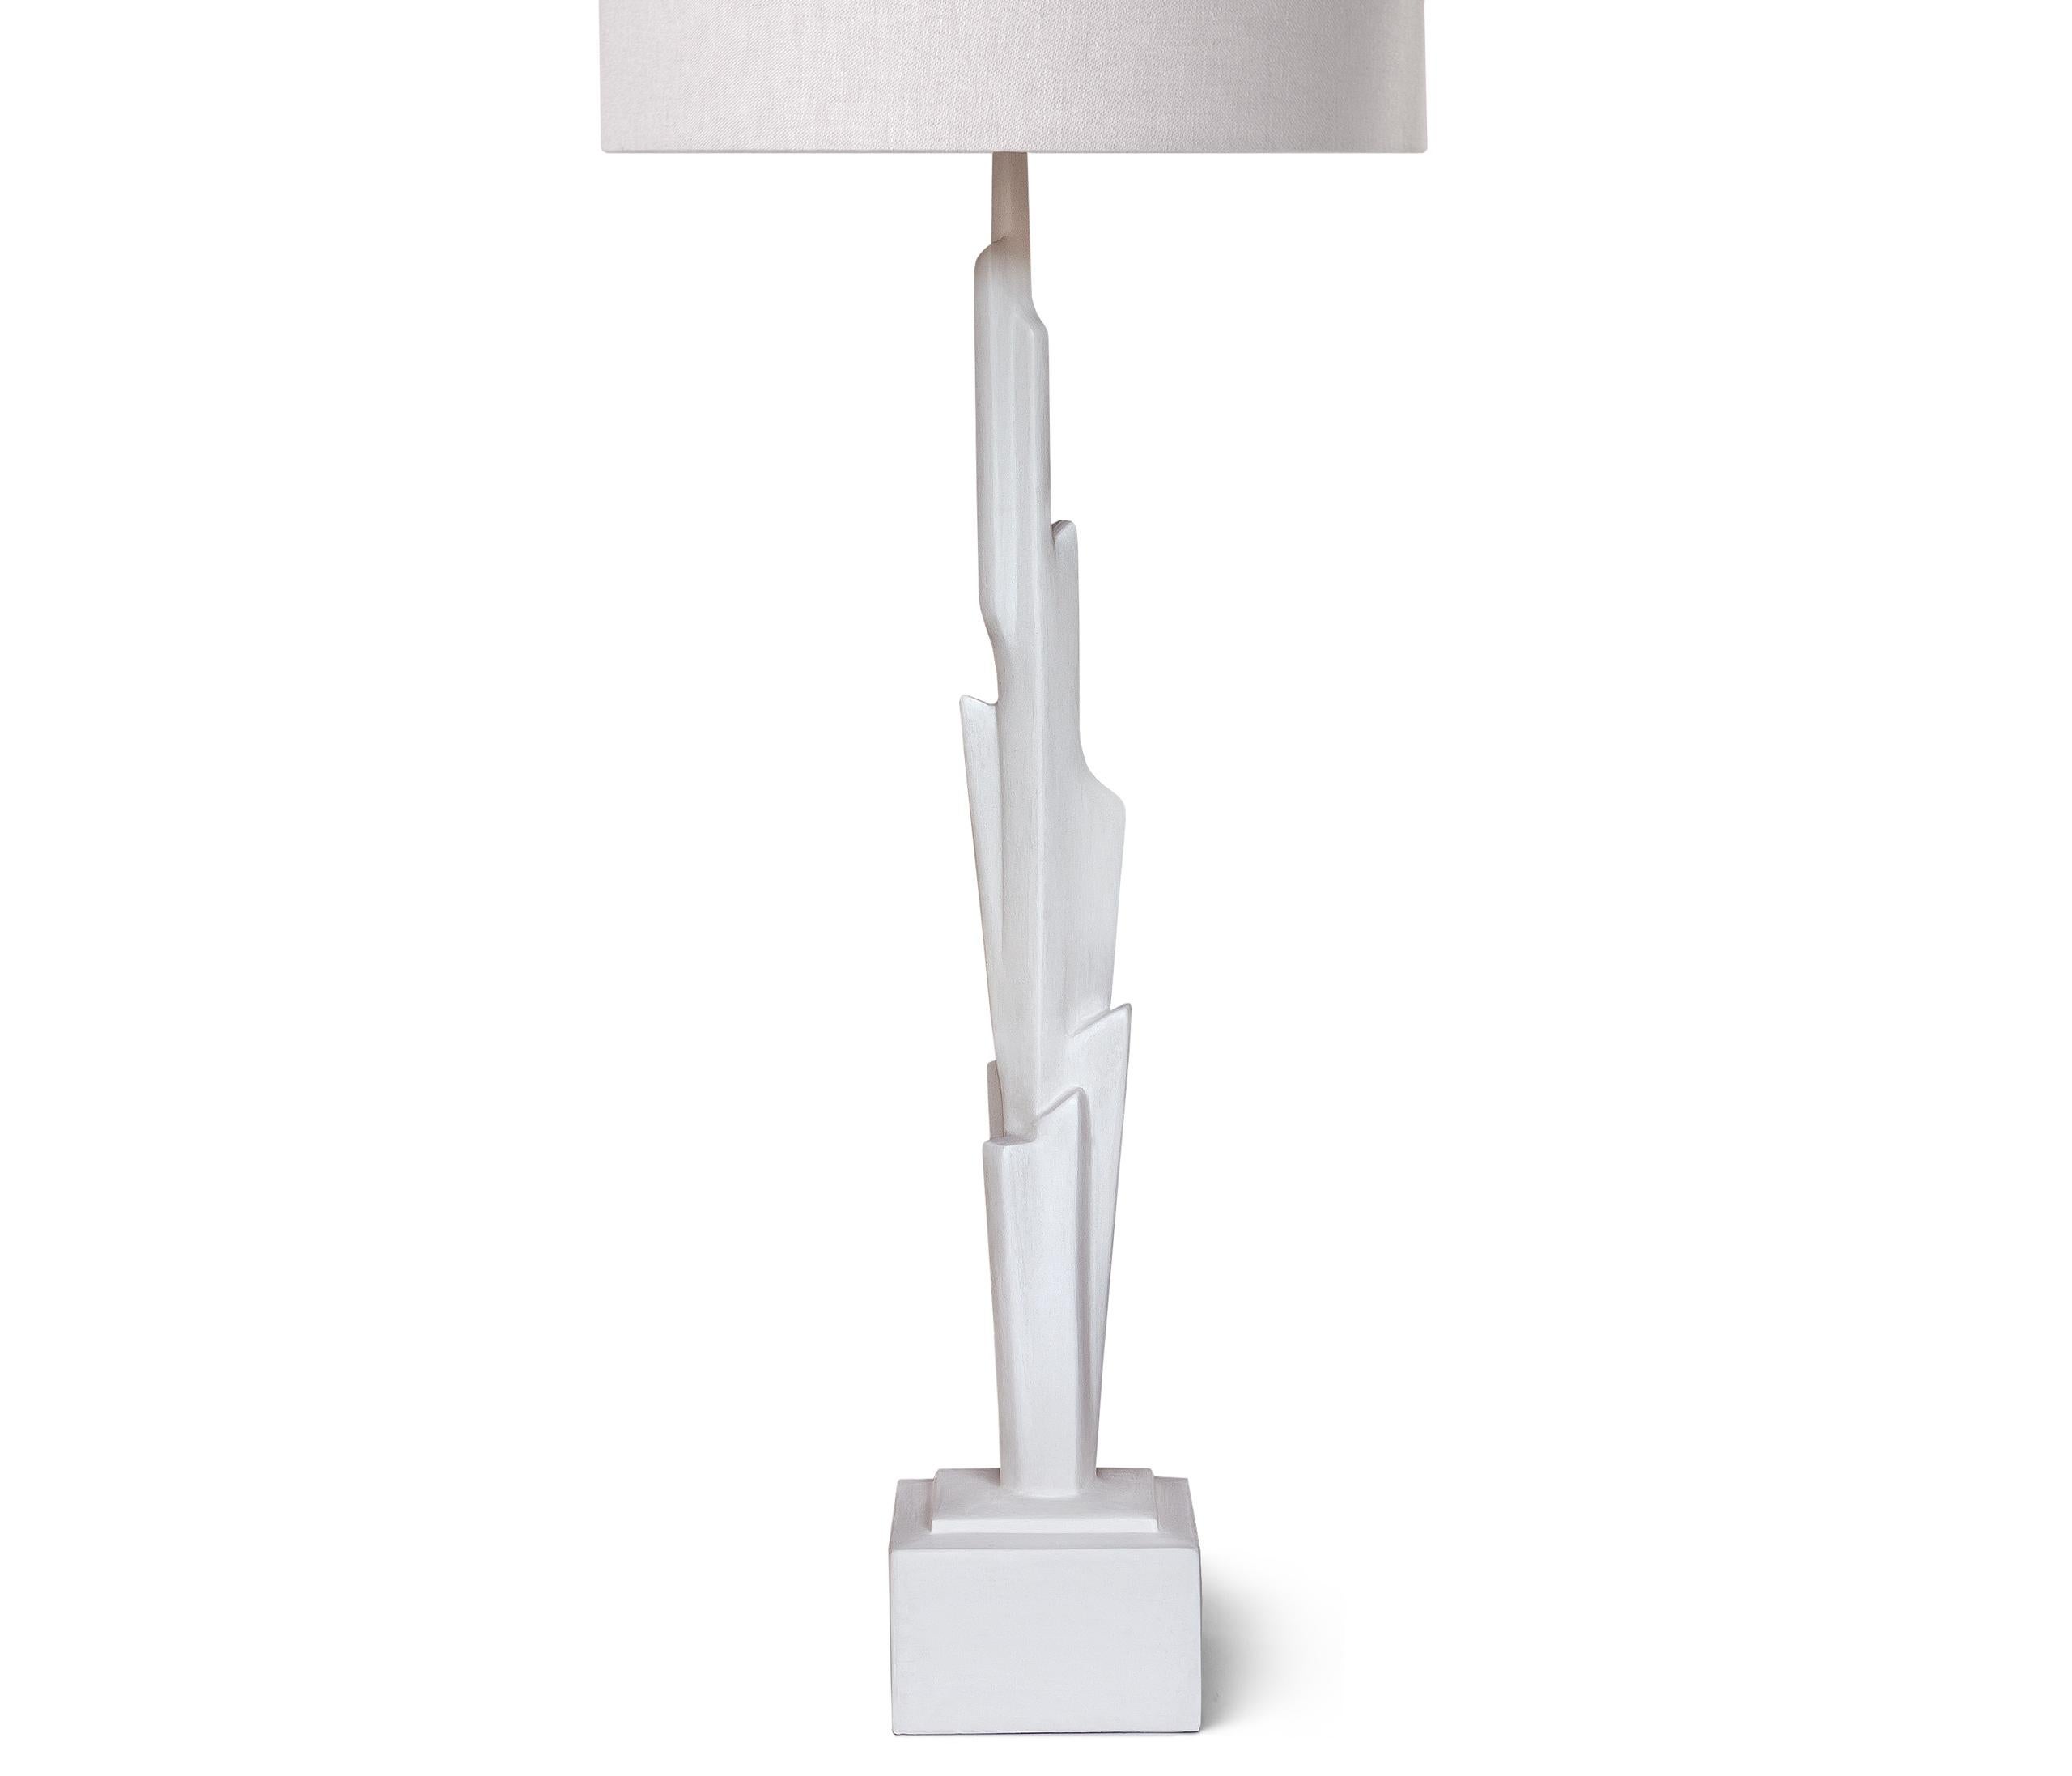 Table lamp in hand sculpted plaster on metal armature. Also available in Sienna Dark Plaster and Black Plaster Finish. Bespoke colours upon request. 
We currently have one available in White, Black and Sienna Dark Plaster Finish (please, allow 2